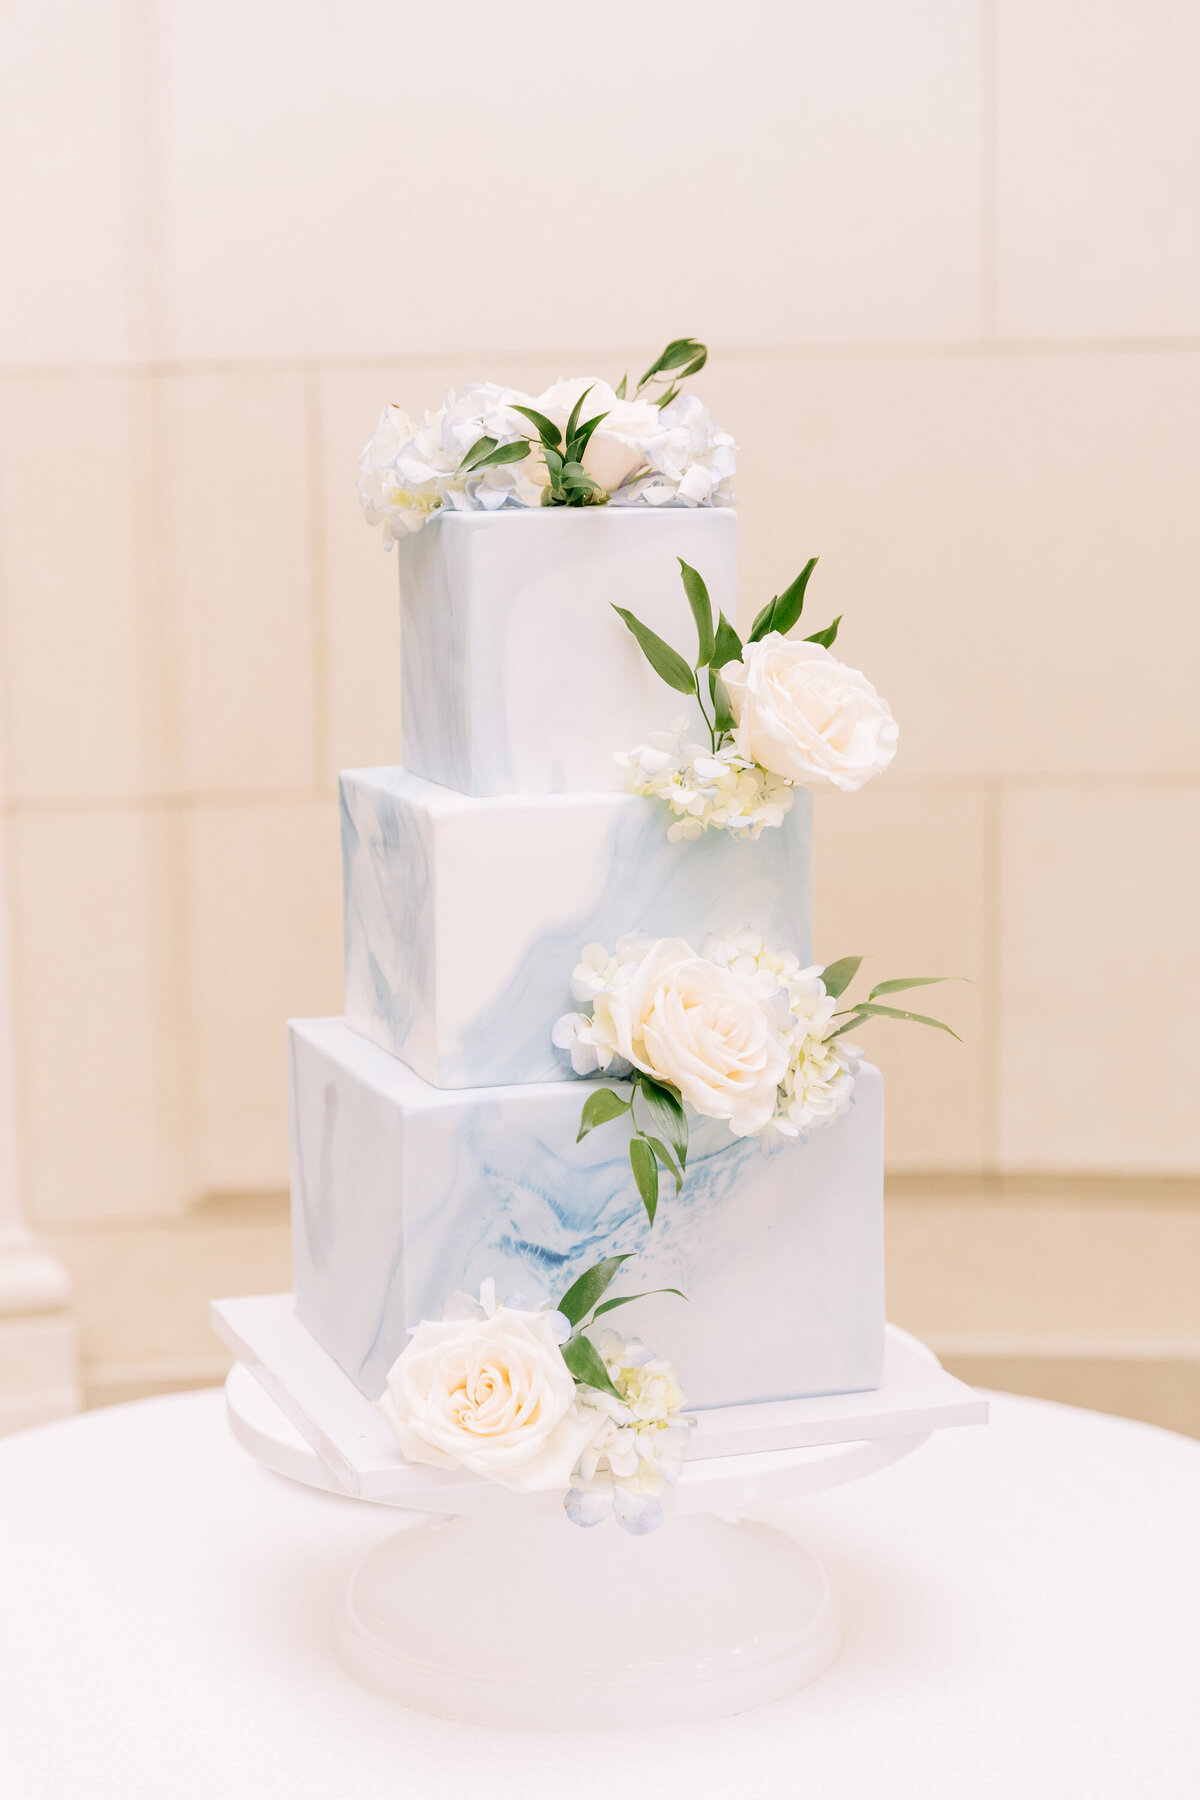 agriffin-events-dc-meridian-wedding-planner-eric-kelley-127